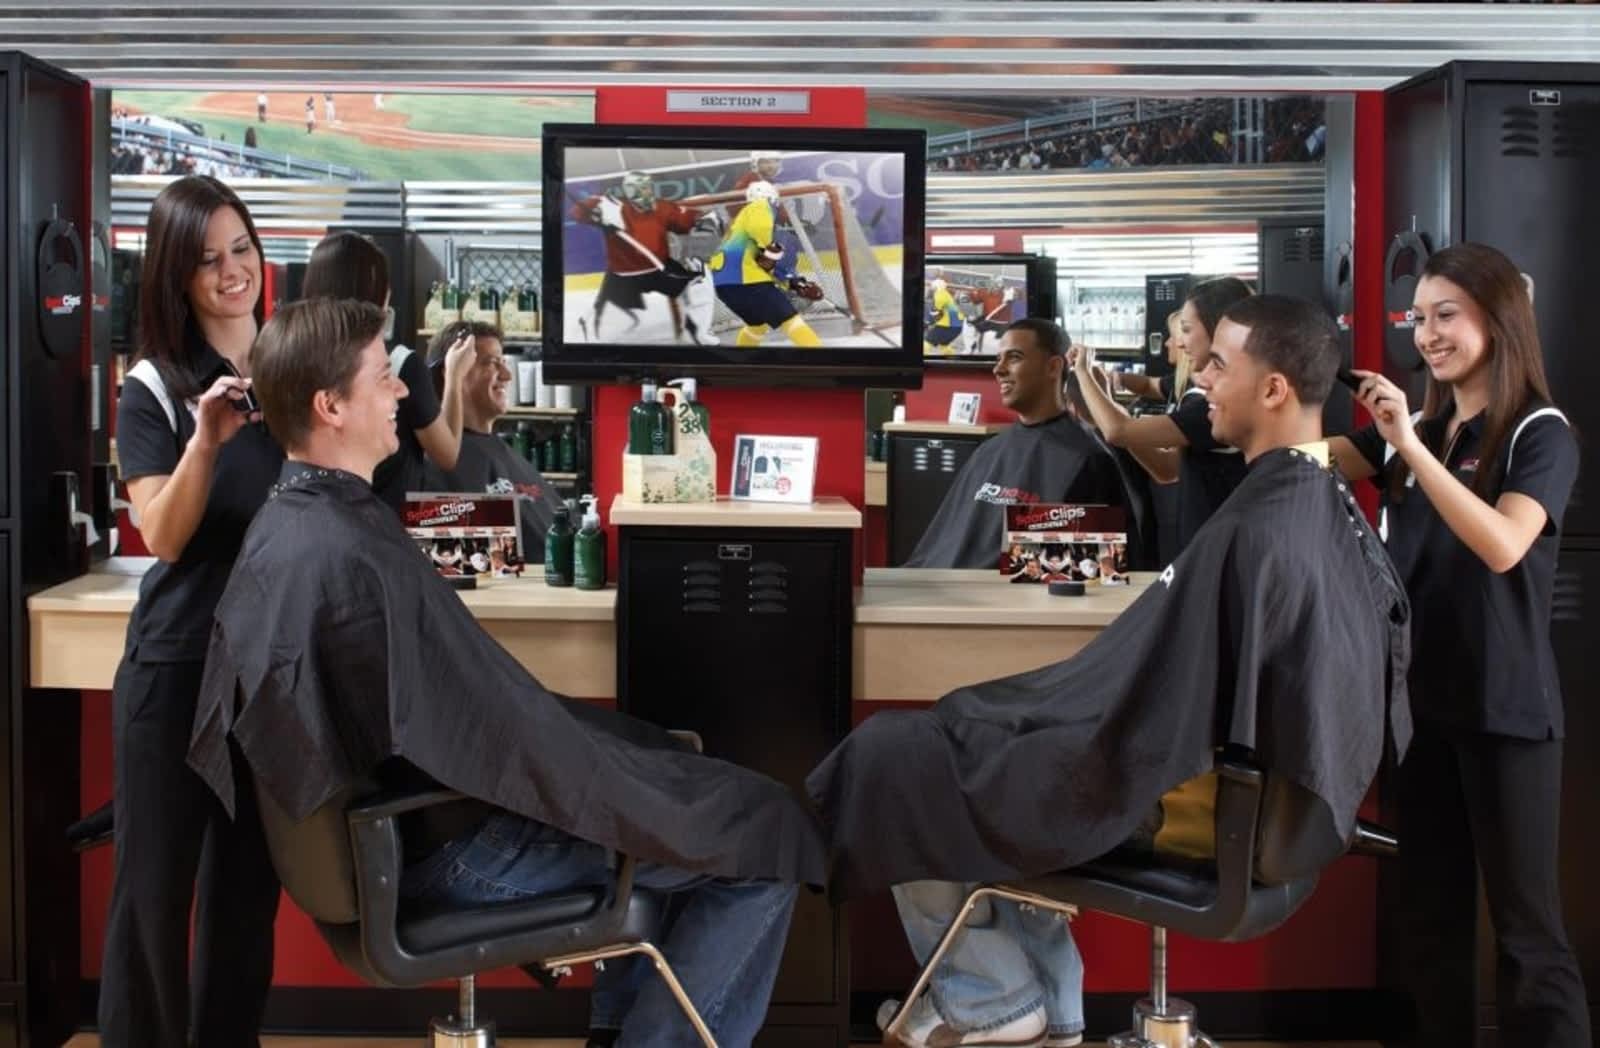 Sport Clips Haircuts Opening Hours 4617 Gordon Rd